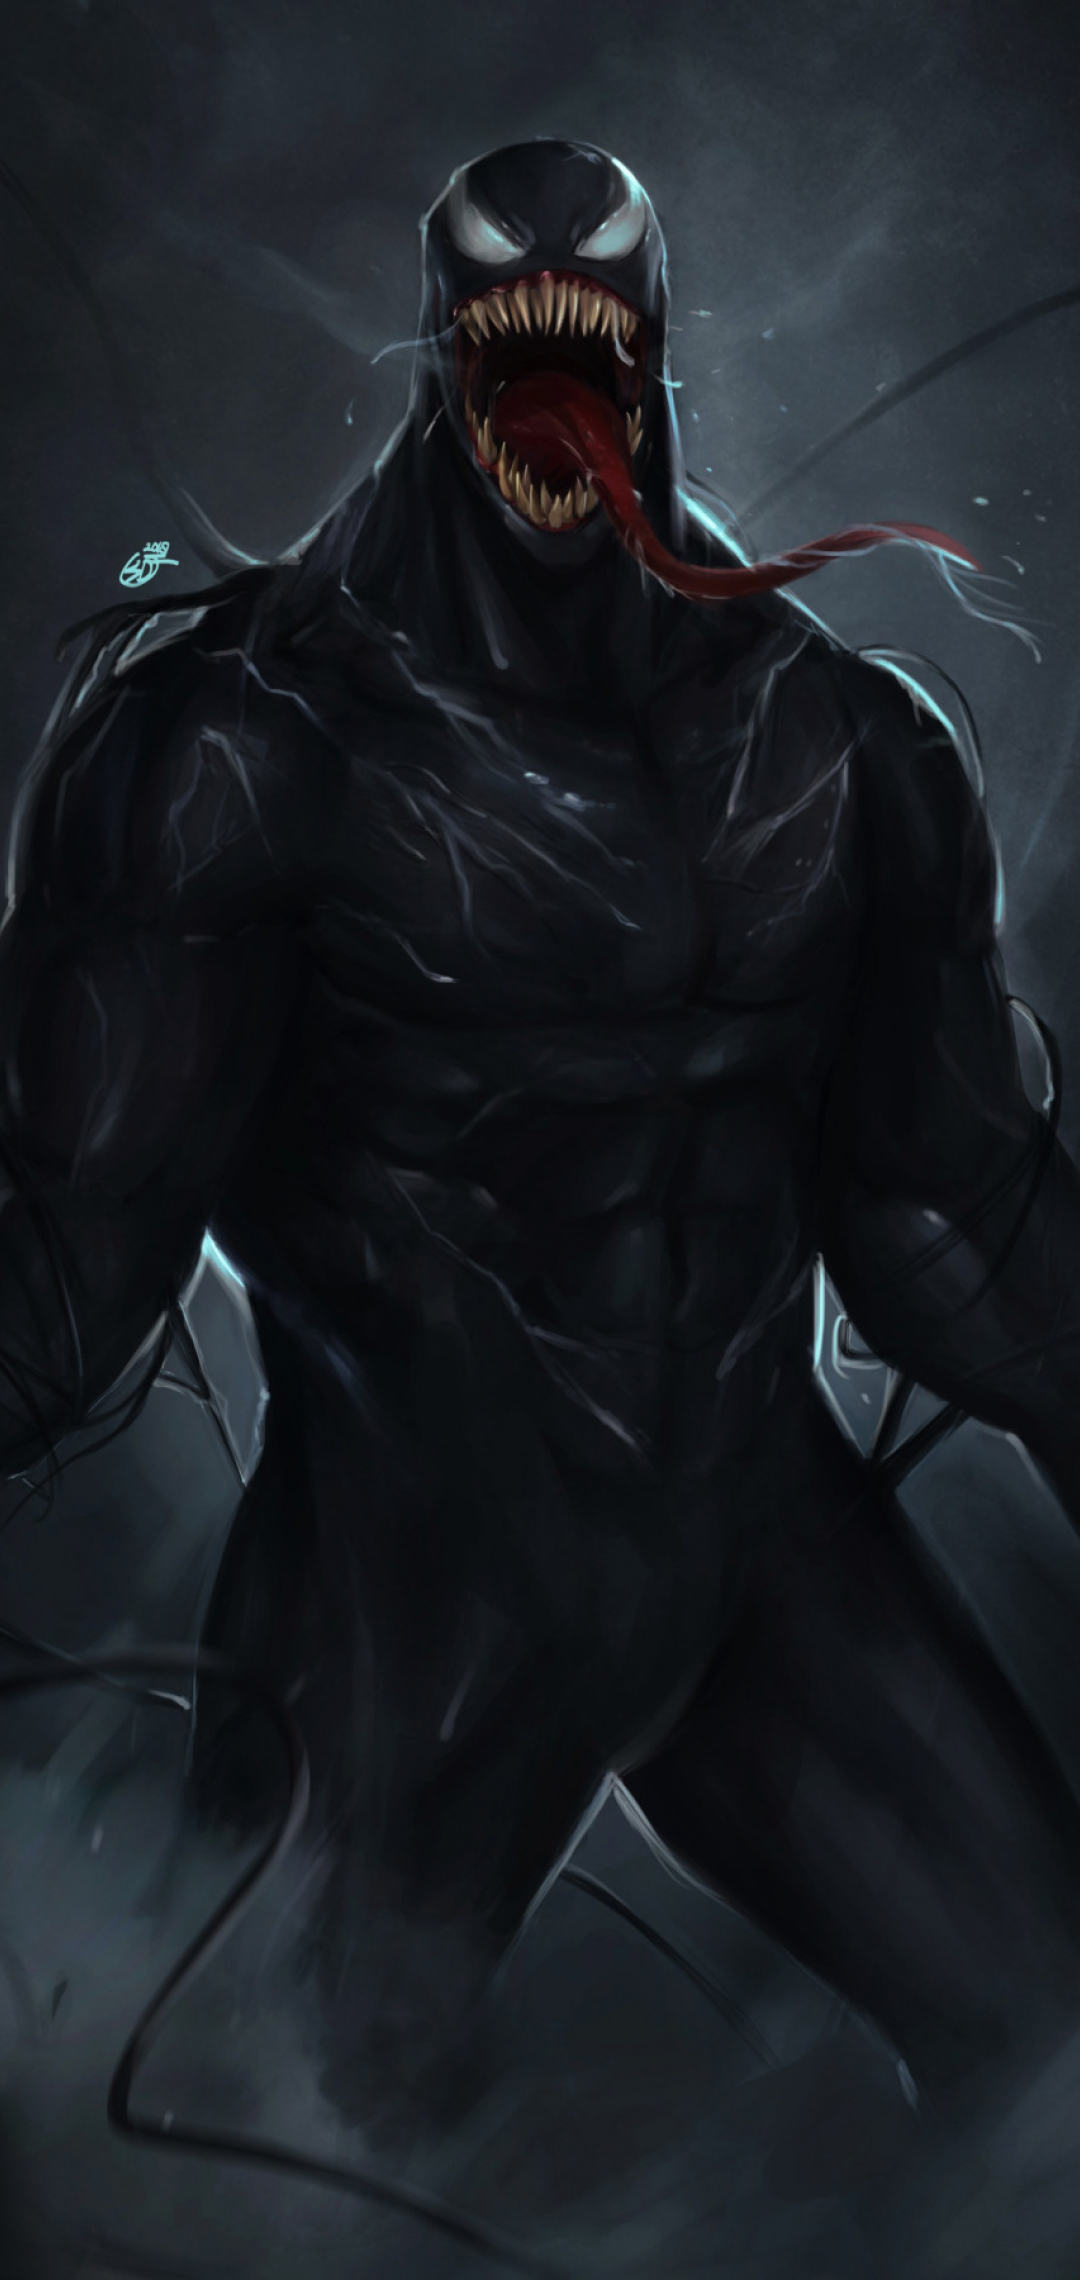 1080x2280 4k Venom Android Wallpapers - Wallpaper Cave 